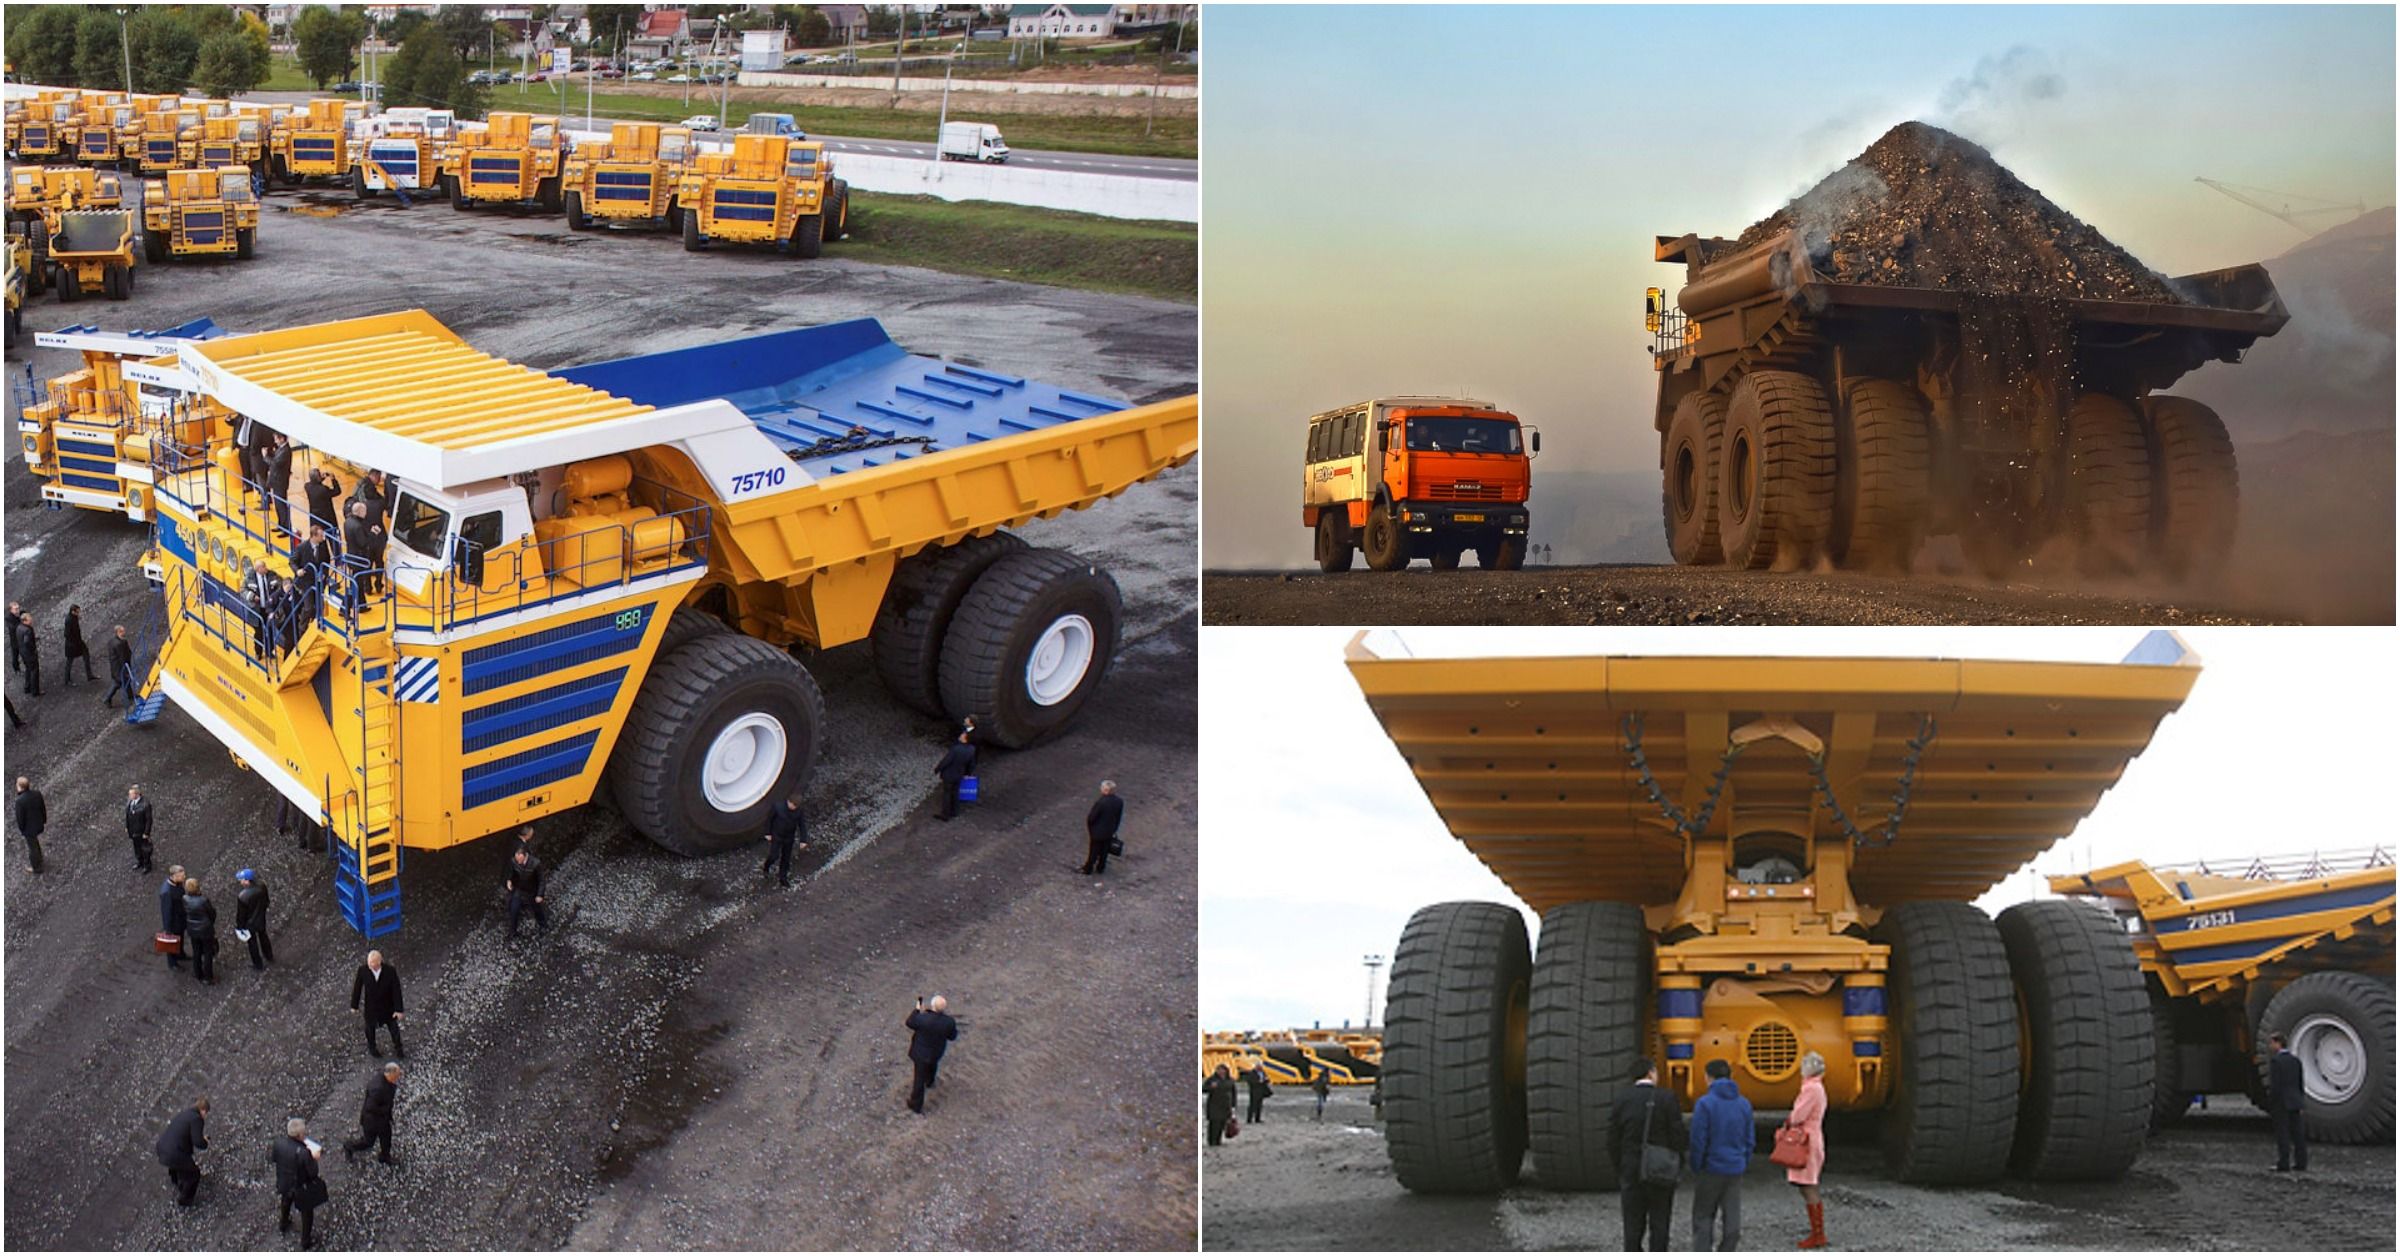 15 Things We Just Learned About BelAZ 75710, The World's Biggest Truck